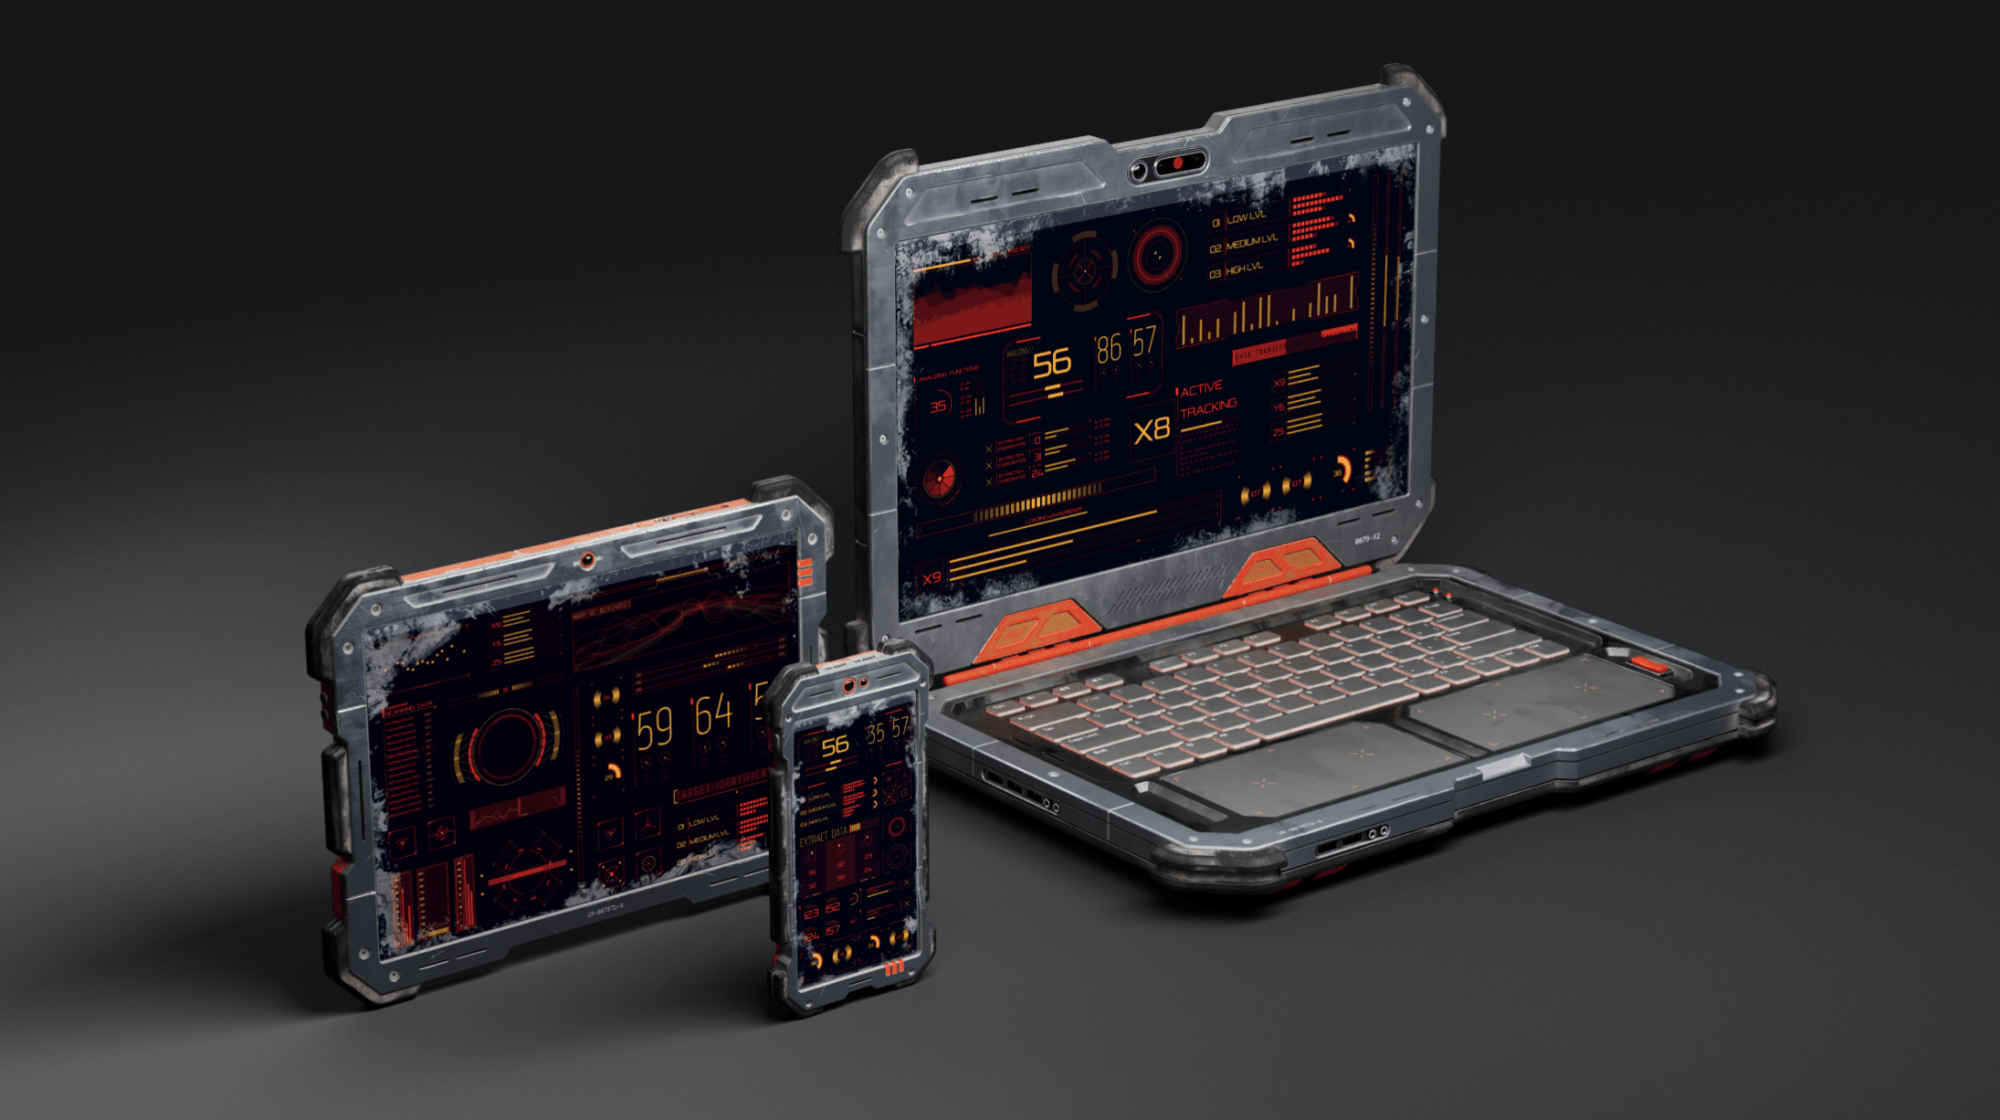 Cyber devices free mockup by Rado Török, showcasing multiple devices in a futuristic setup.